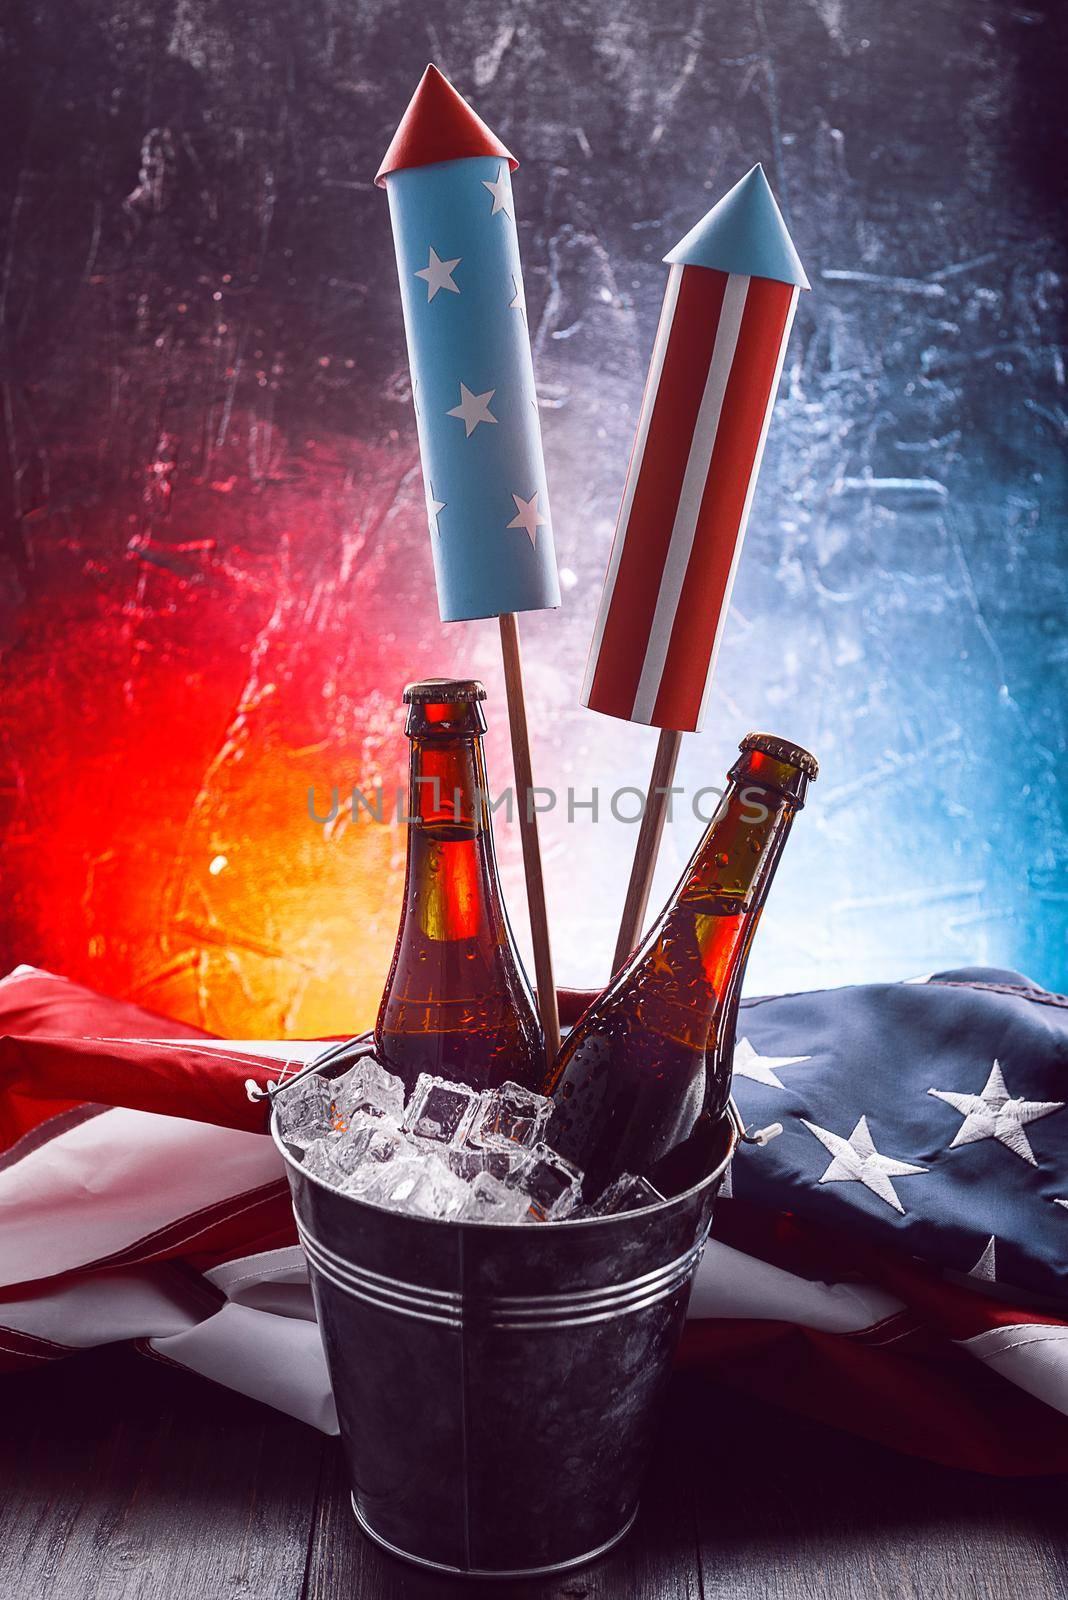 two bottles of beer in an ice bucket with the American flag lying nearby and rockets for fireworks. Independence Day celebration concept by vvmich